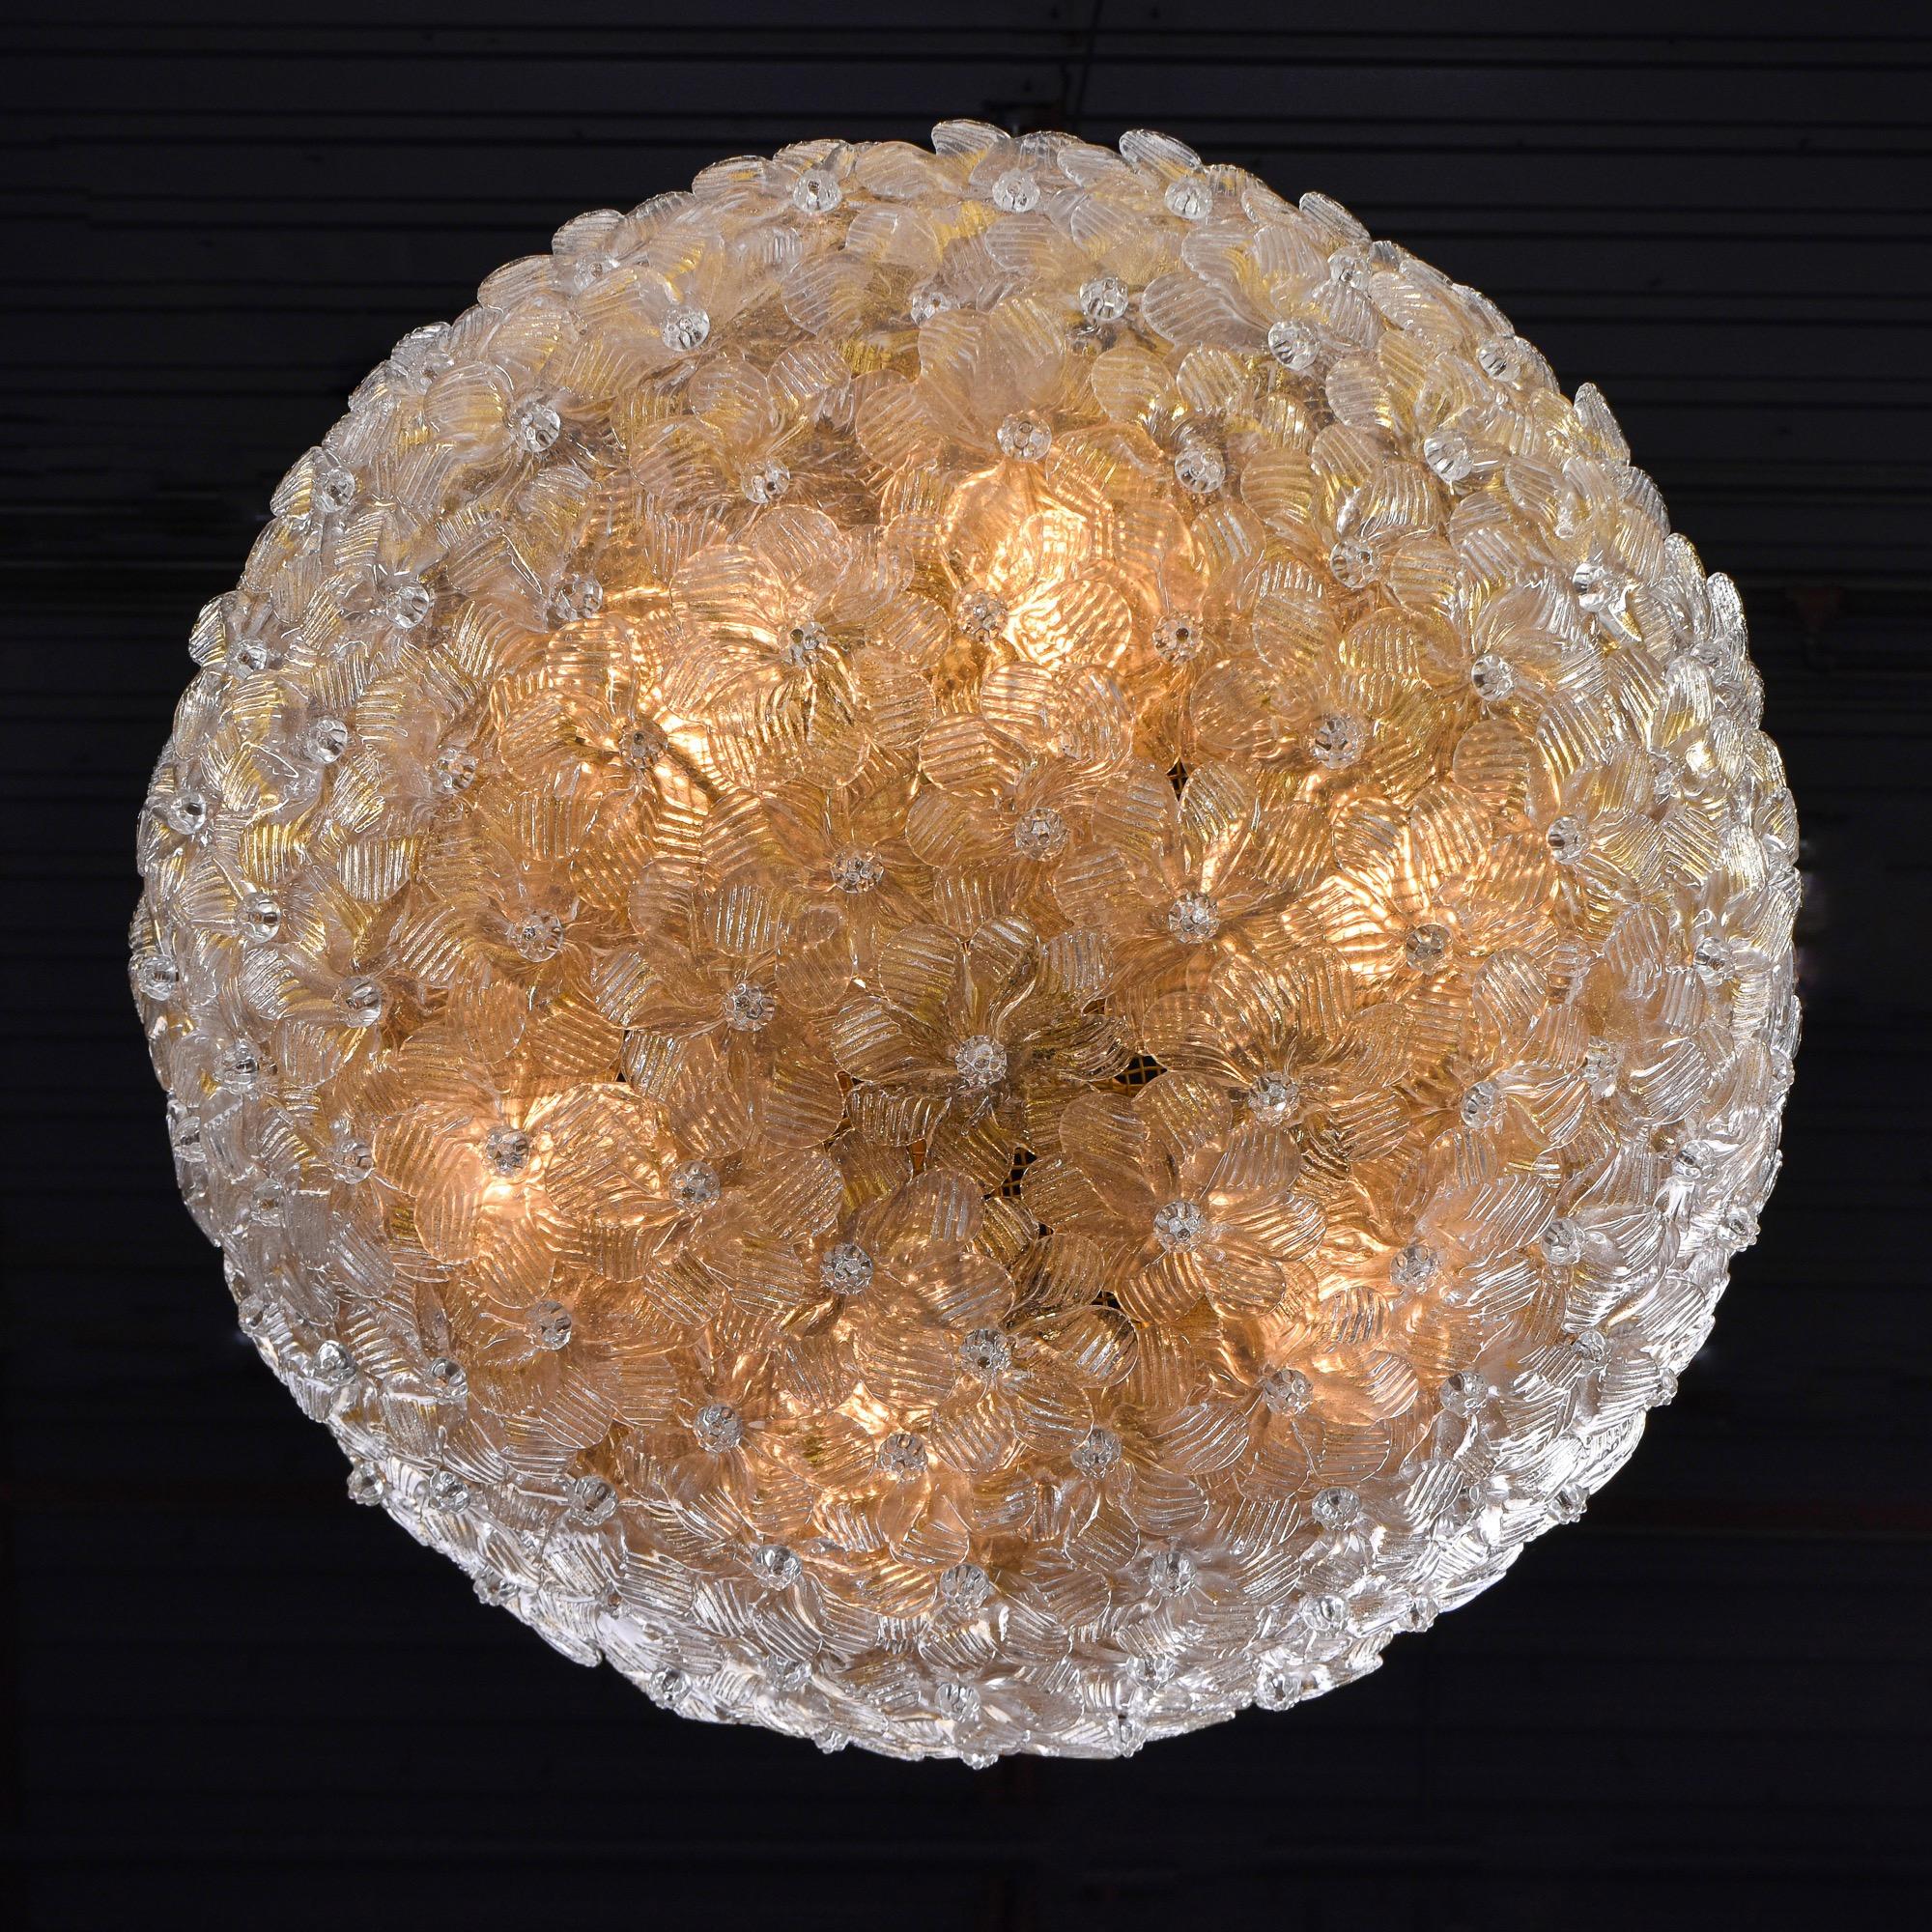 Found in Italy, this circa 1970 semi flush mount fixture is attributed to Barovier. This dome-shaped fixture consists of dozens of clear and gold Murano glass flowers that cover a brass mesh cover. Inside are 6 candelabra sized sockets. Brass